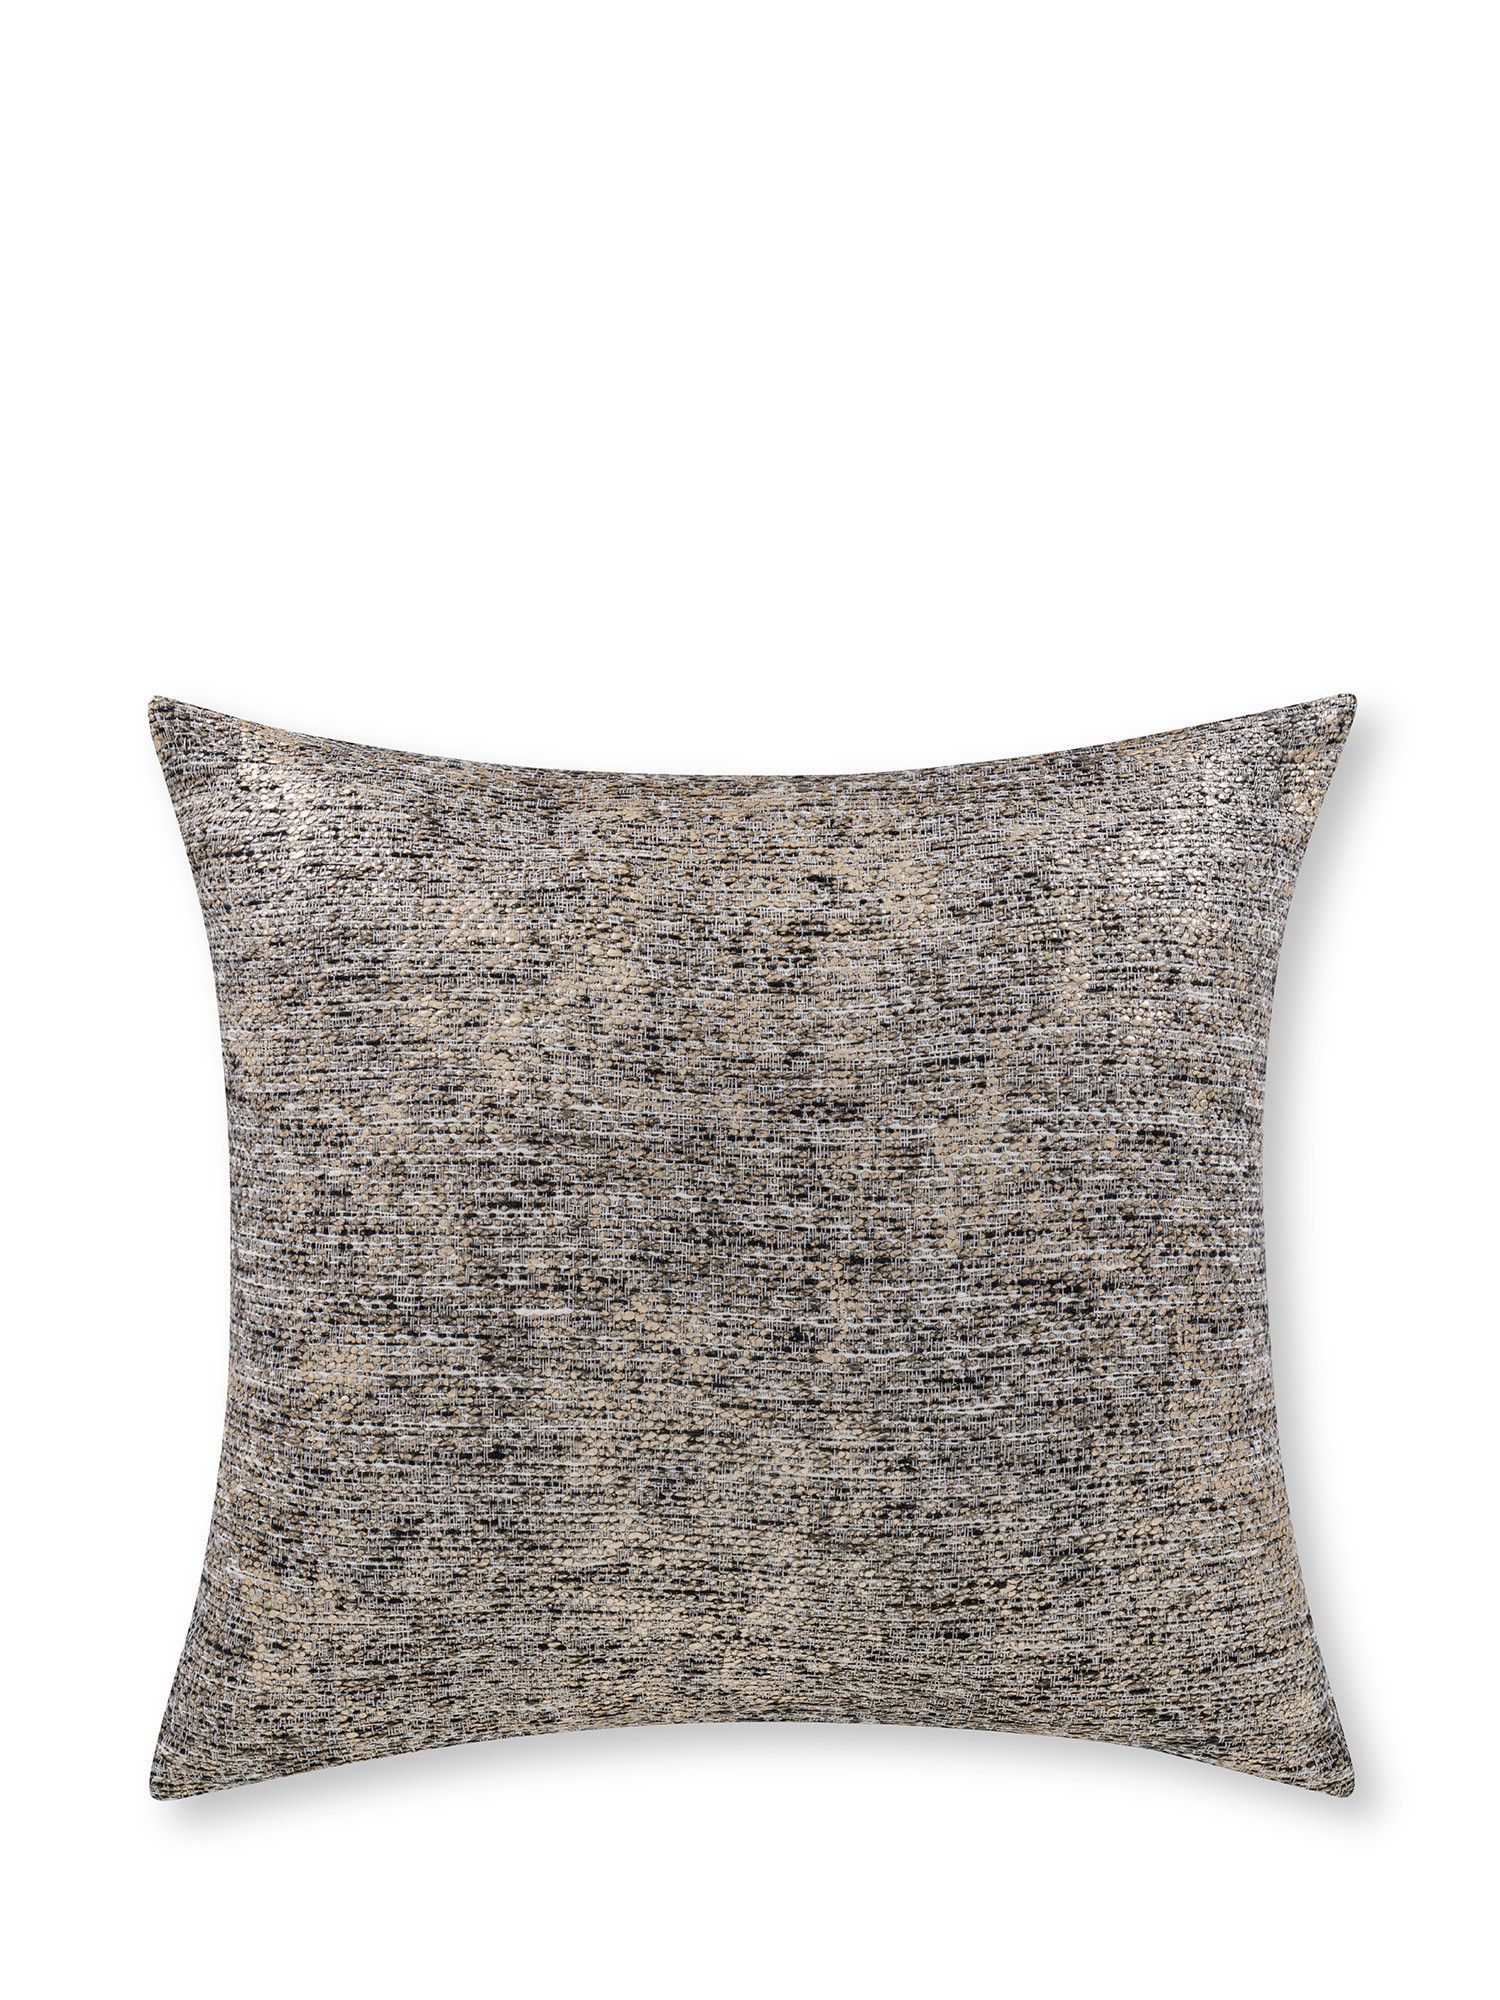 Cushion in jacquard fabric with black and gold relief pattern 45x45 cm, Black, large image number 0